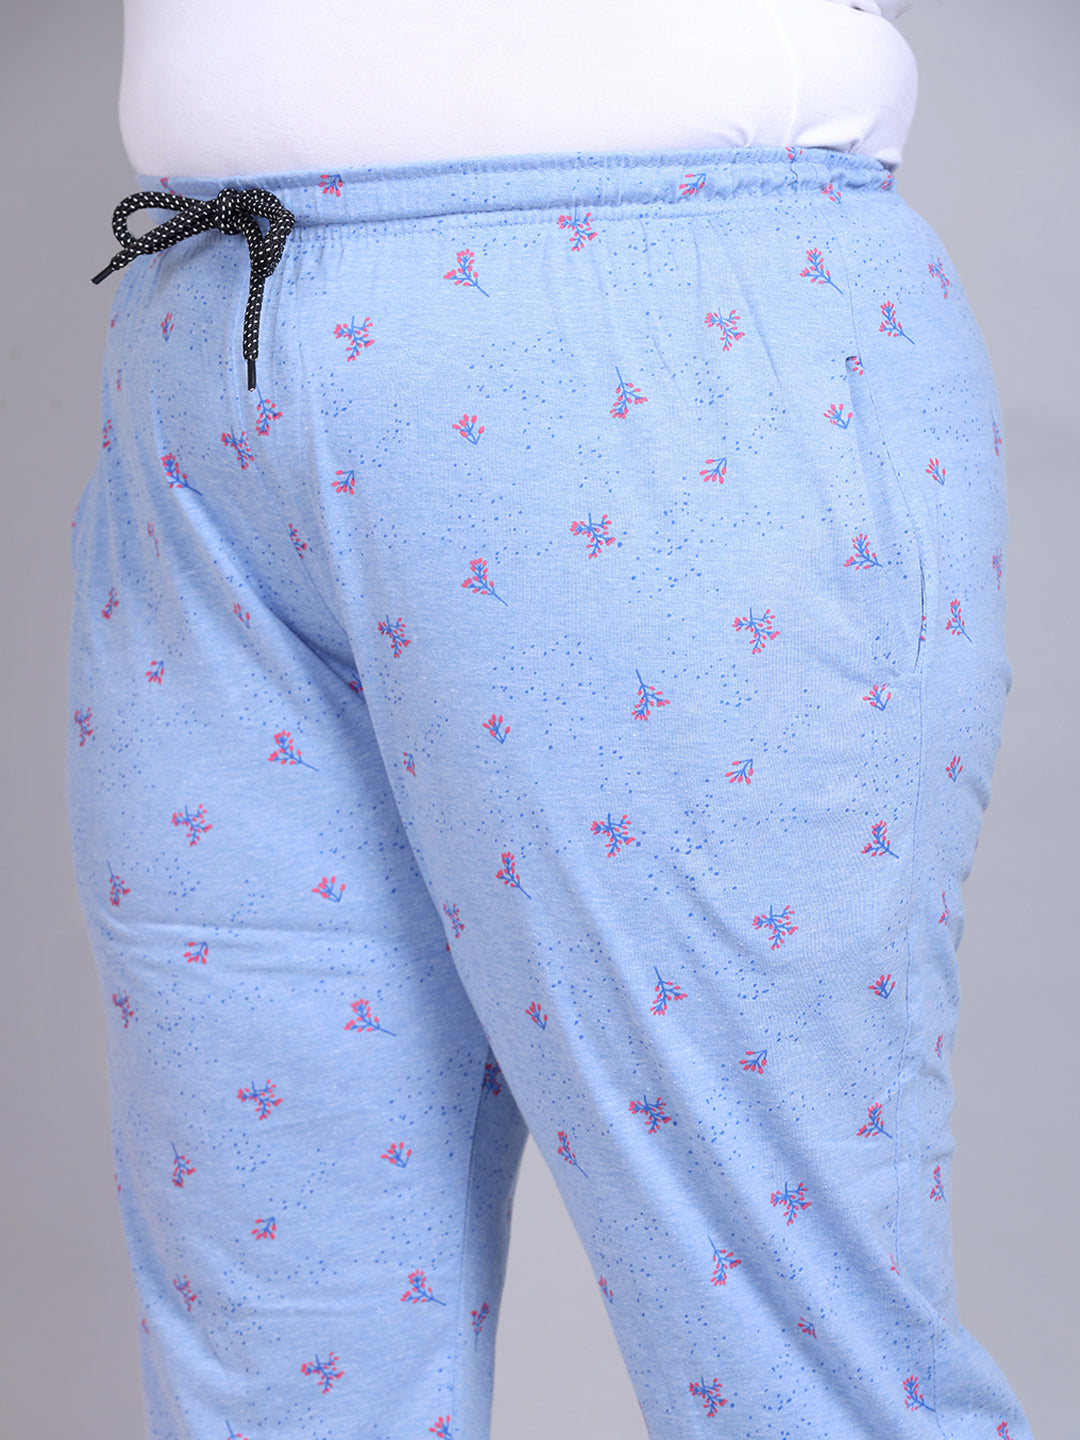 Stylish Blue Printed Cotton Night Pants For women Online In India